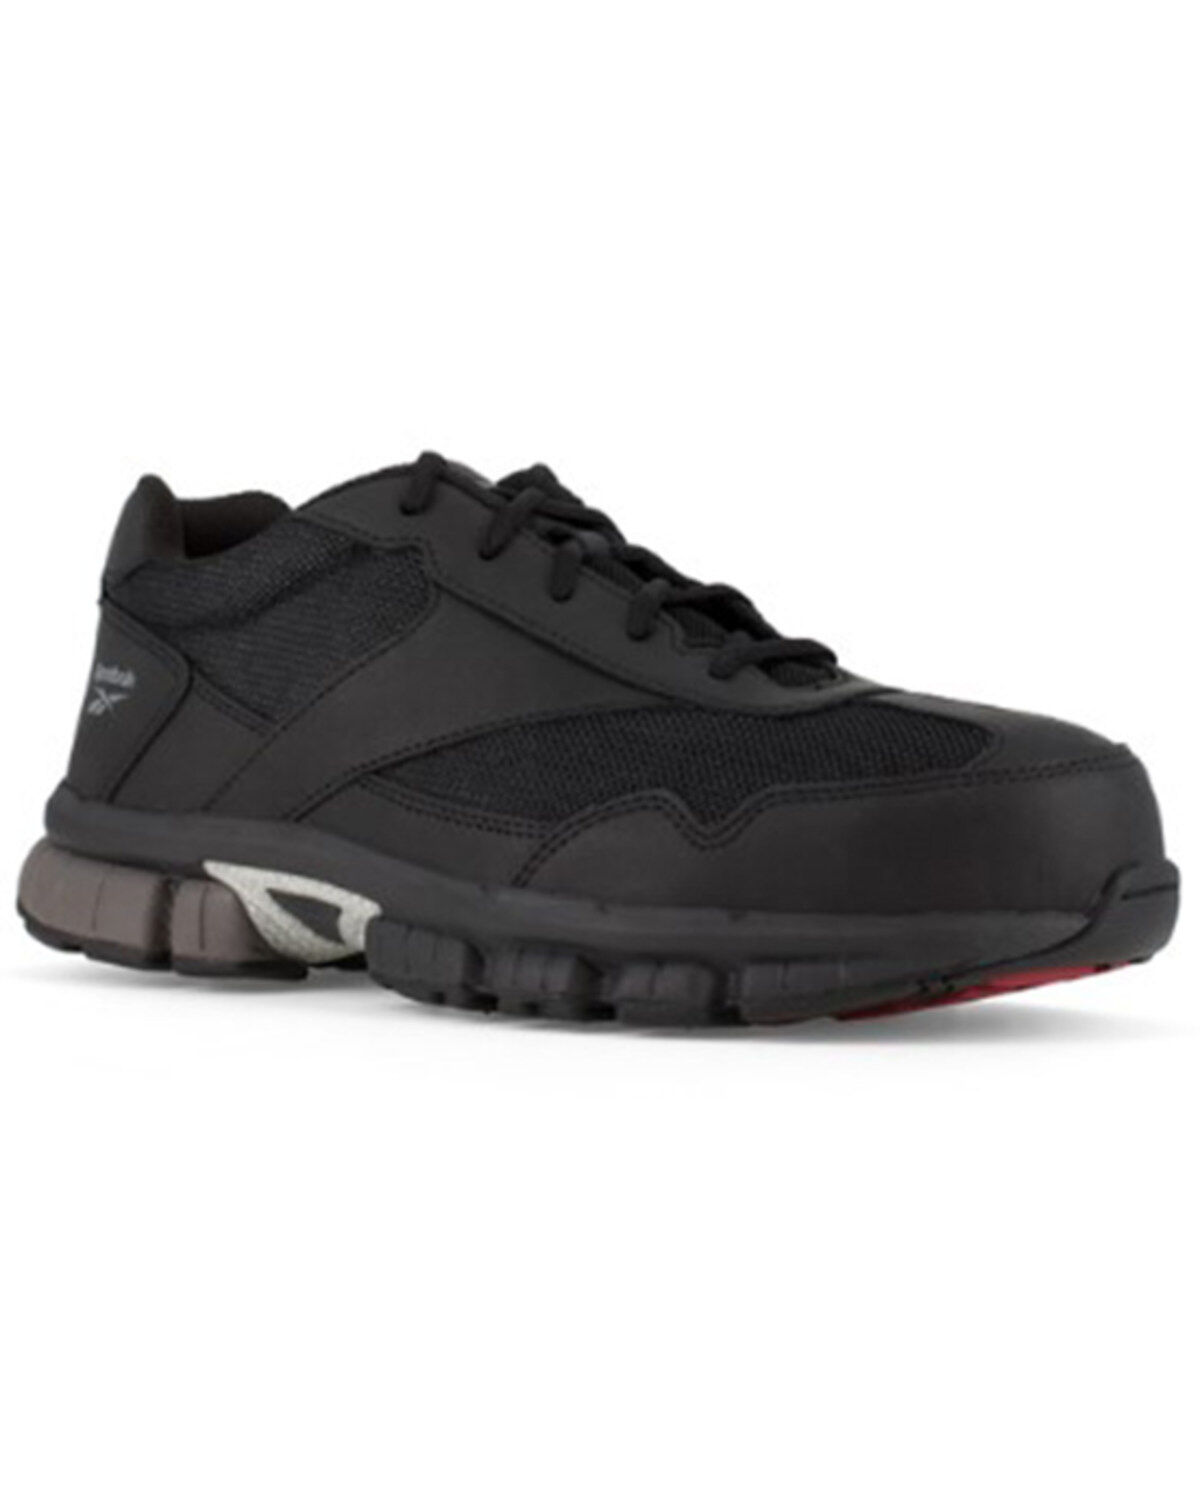 black trainer work shoes